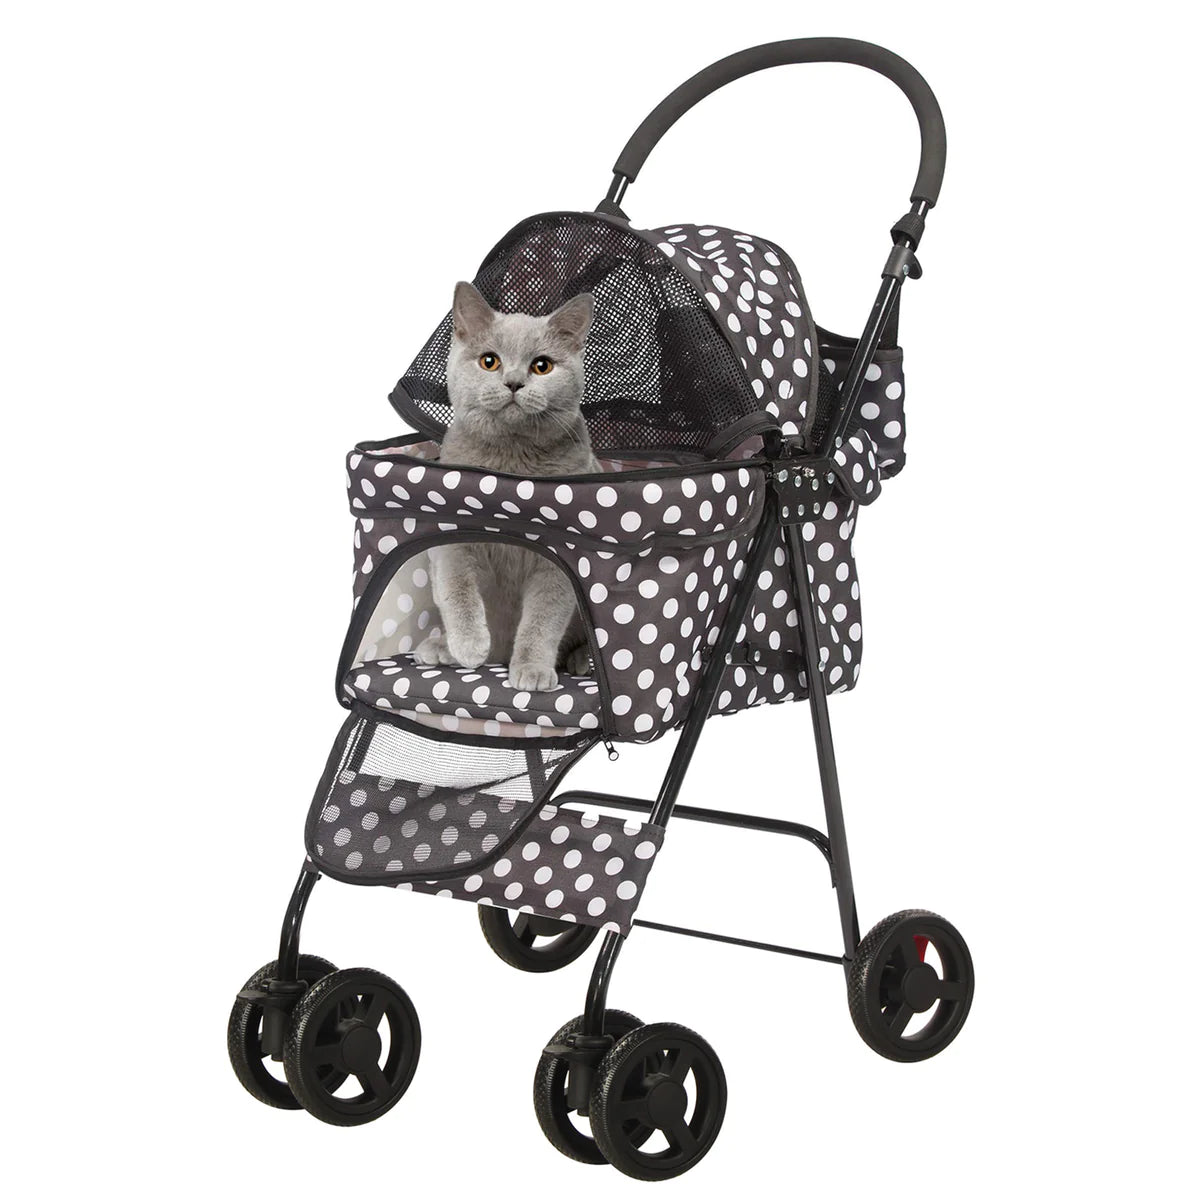 Folding Dog Stroller Travel Cage Stroller for Pet Cat Kitten Puppy Carriages